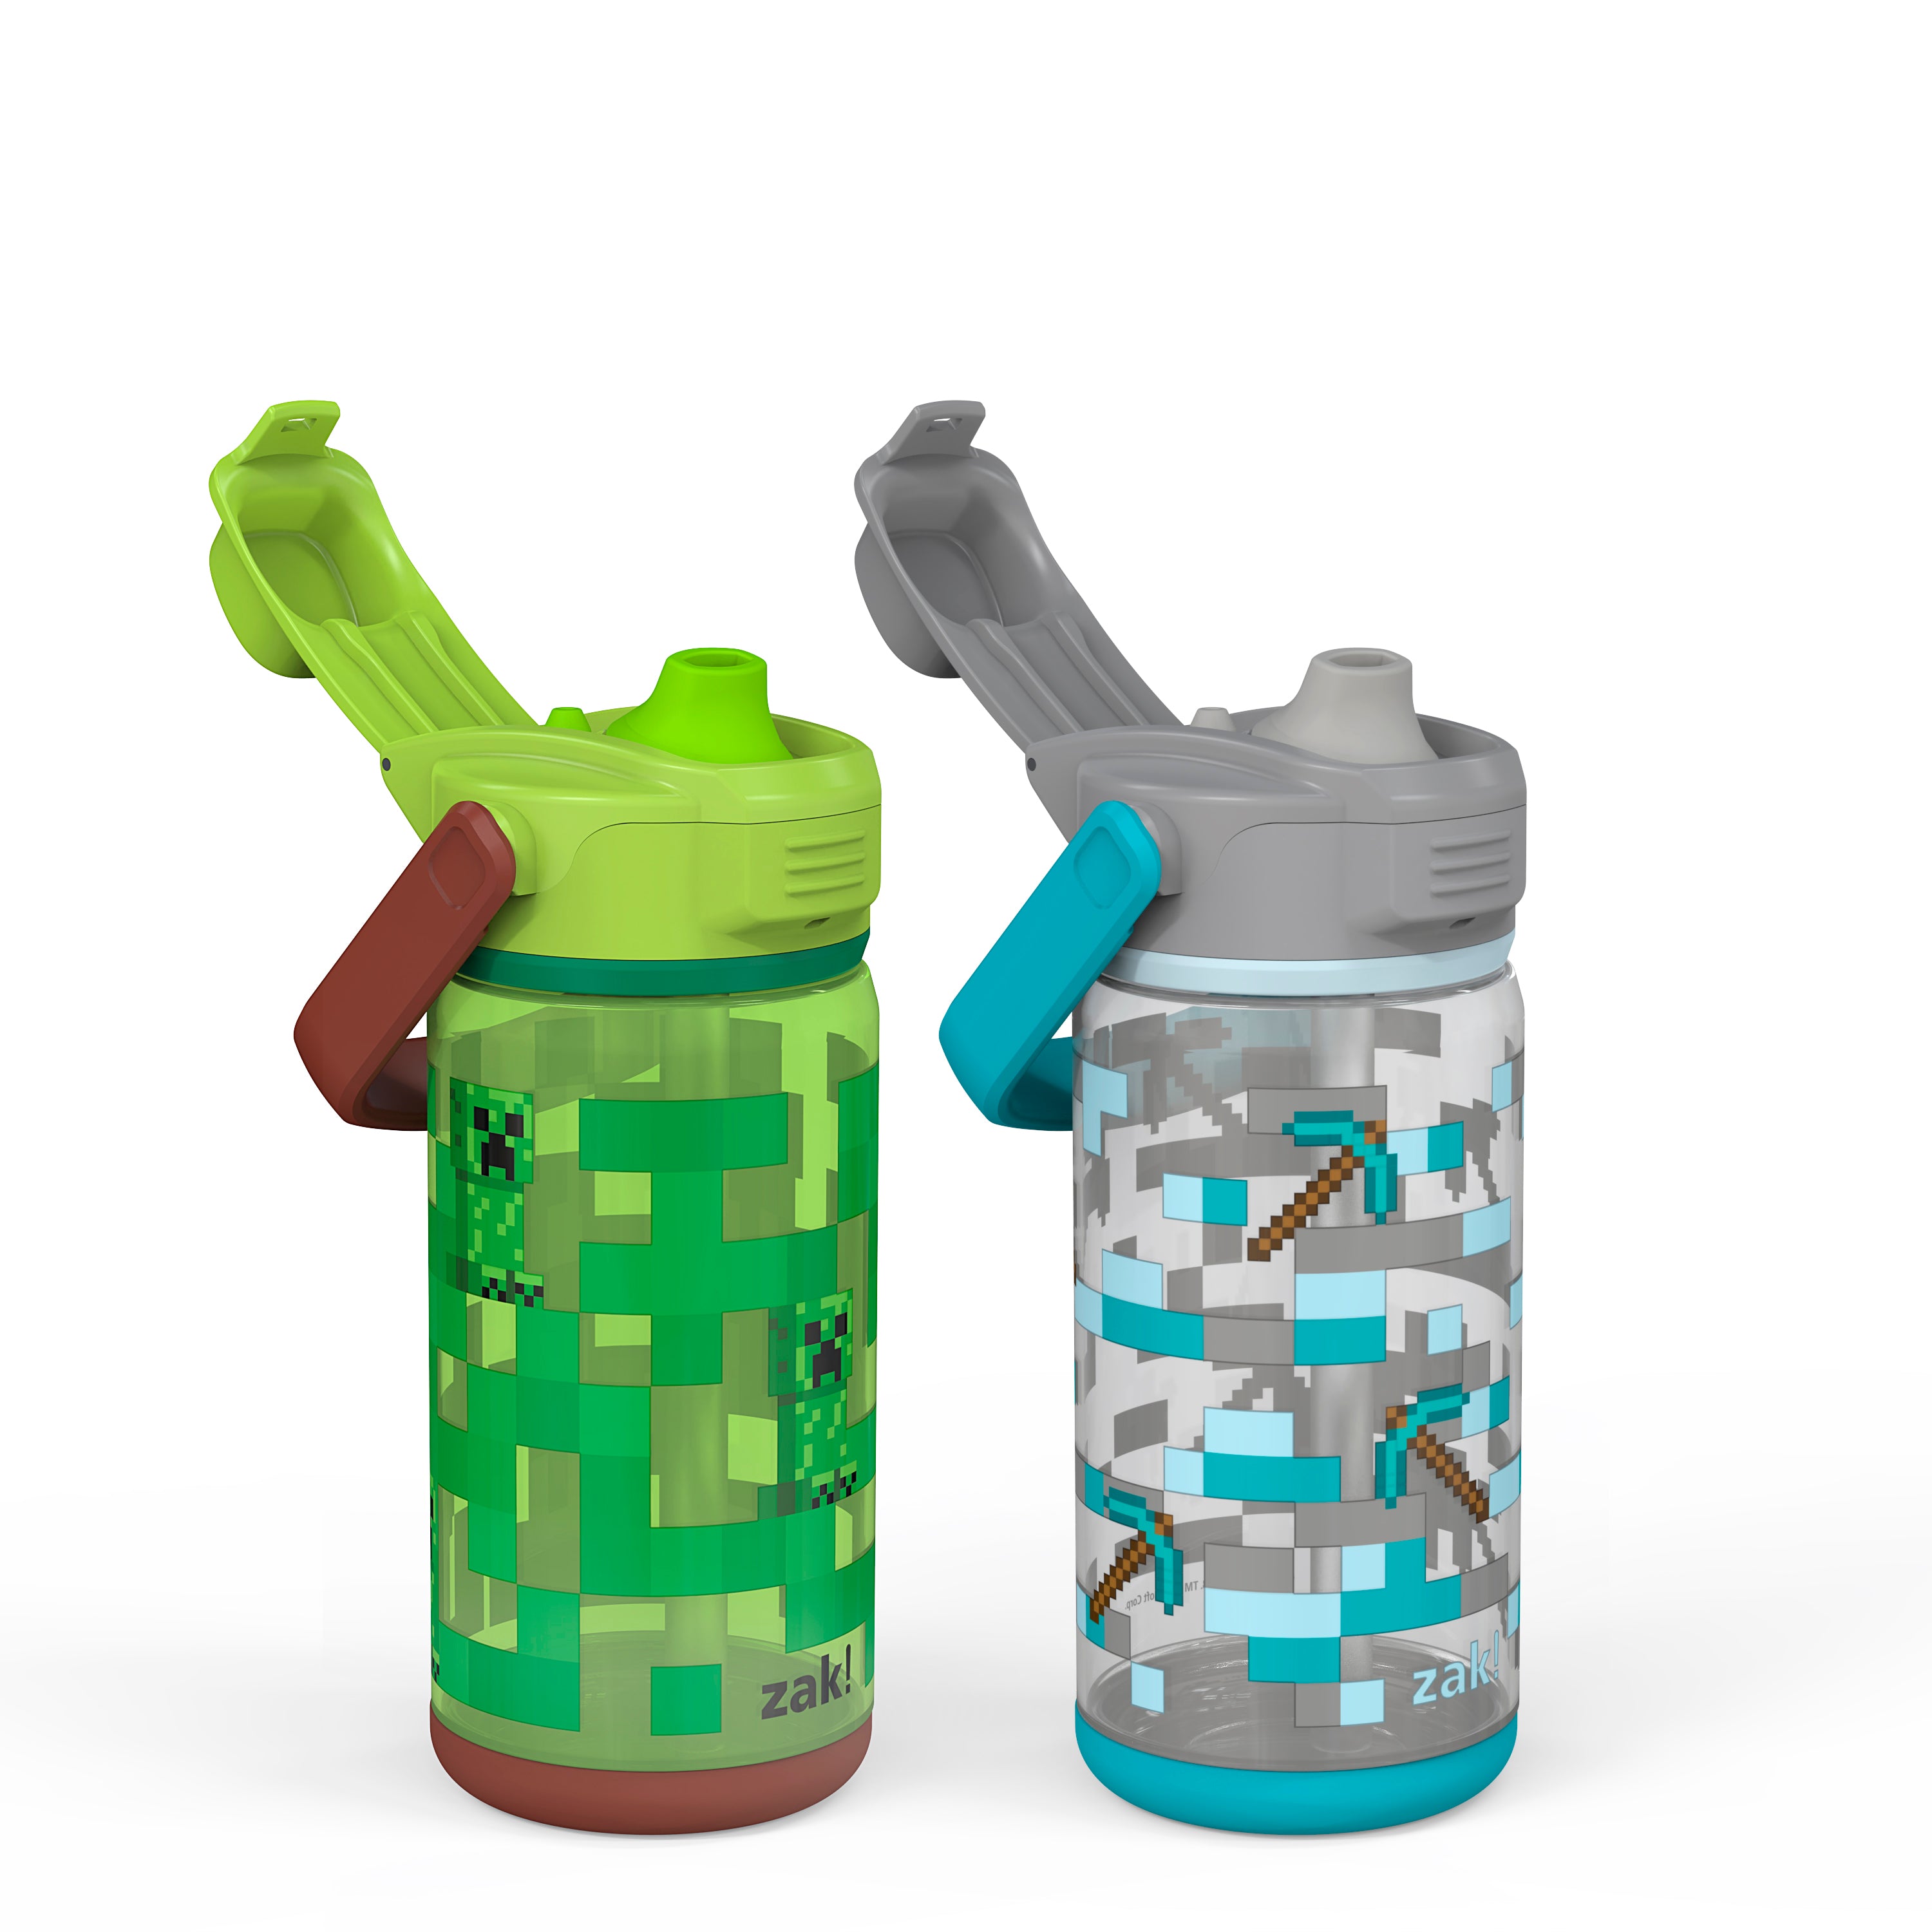 Minecraft Creeper Beacon 2-Piece Kids Water Bottle Set with Covered Spout, 16 Ounces